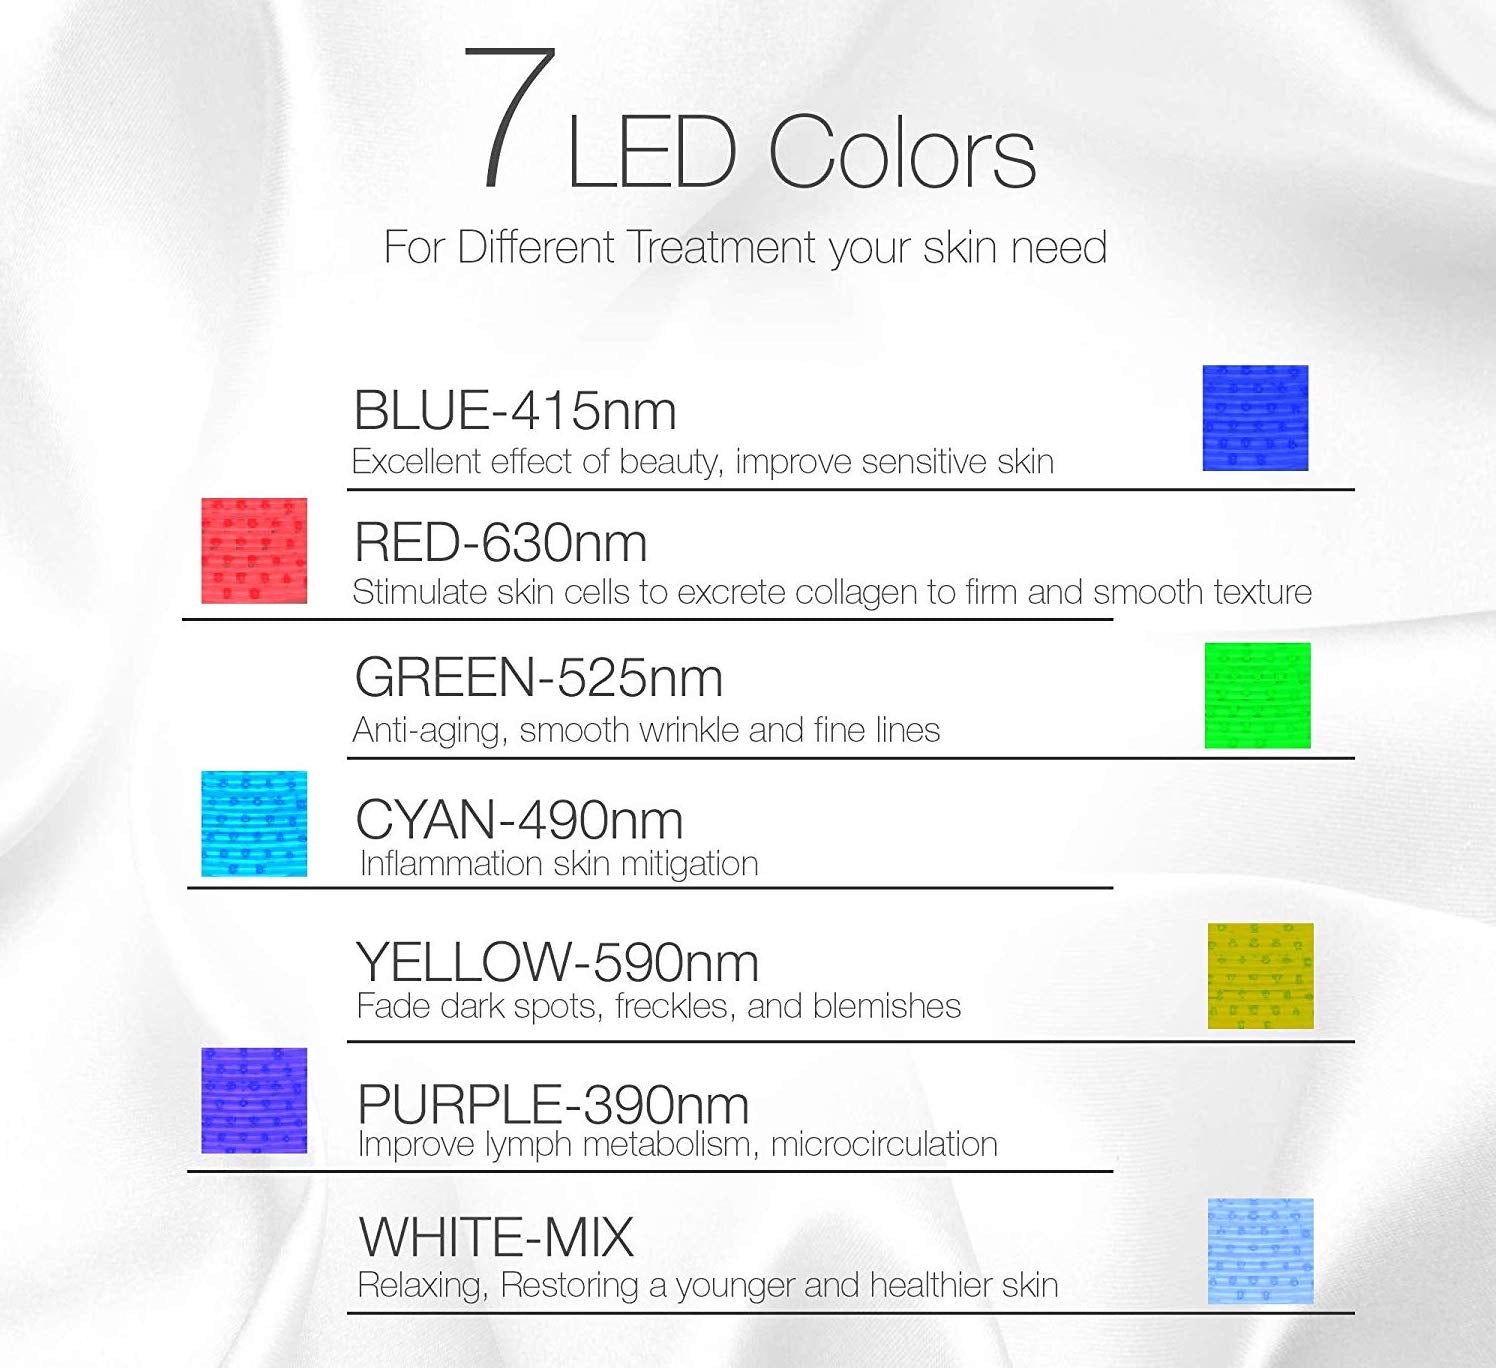 7 different color treatments and benefits